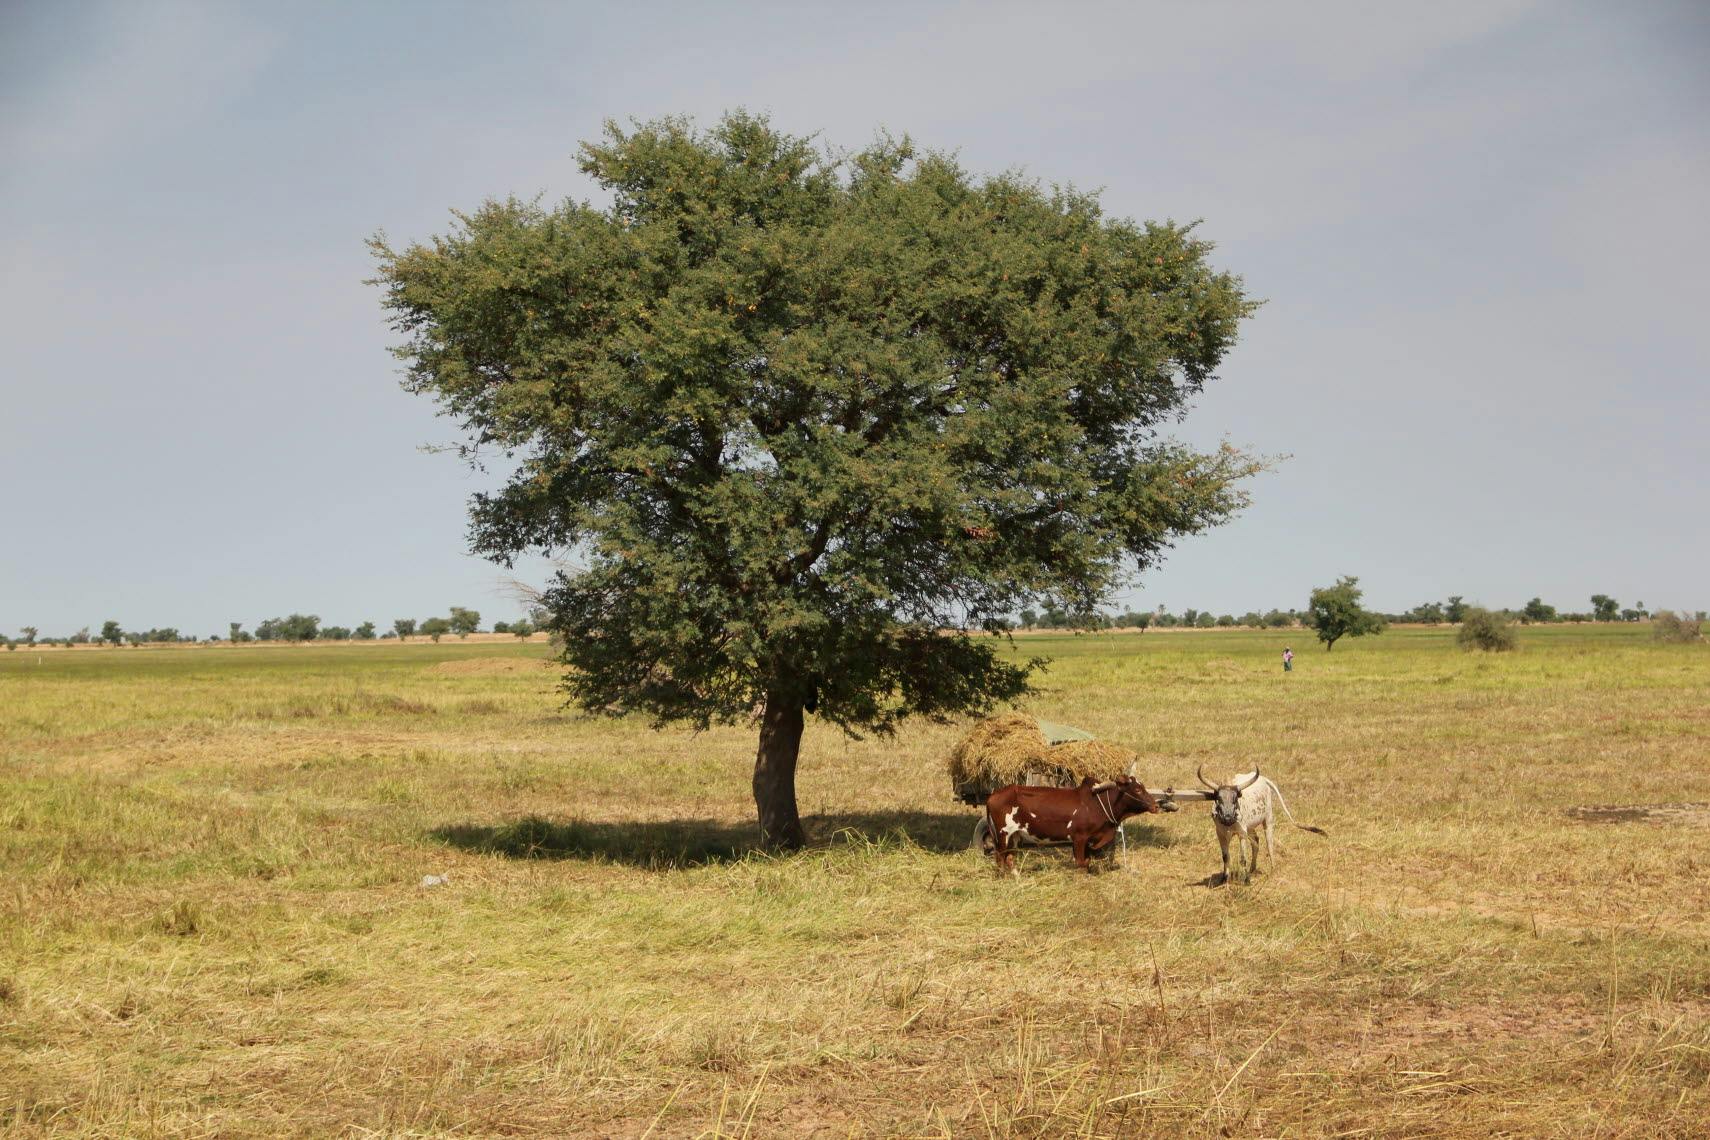 Cattle in front of a tree.